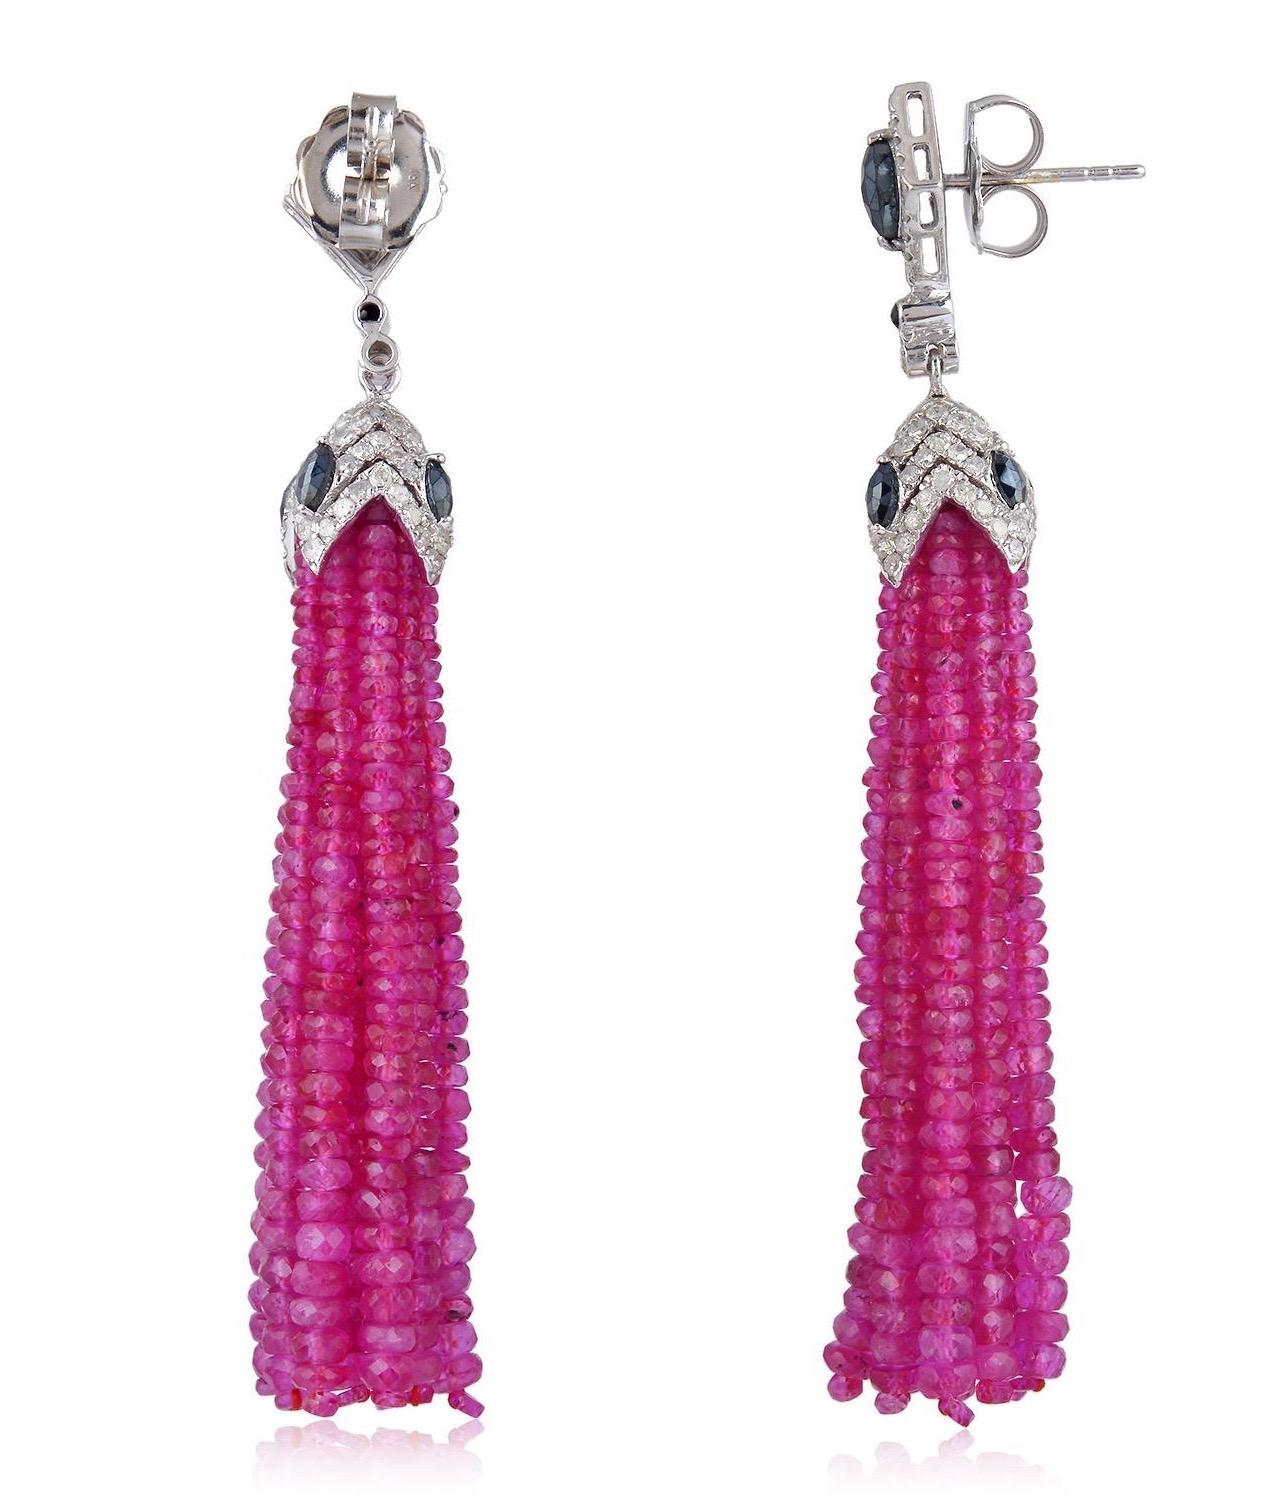 These stunning exceptional tassel earrings are handmade in 18-karat gold & sterling silver.  It is set with 84.89 carats ruby, 1.84 carat spinel and 1.75 carats of glittering diamonds. 

FOLLOW  MEGHNA JEWELS storefront to view the latest collection